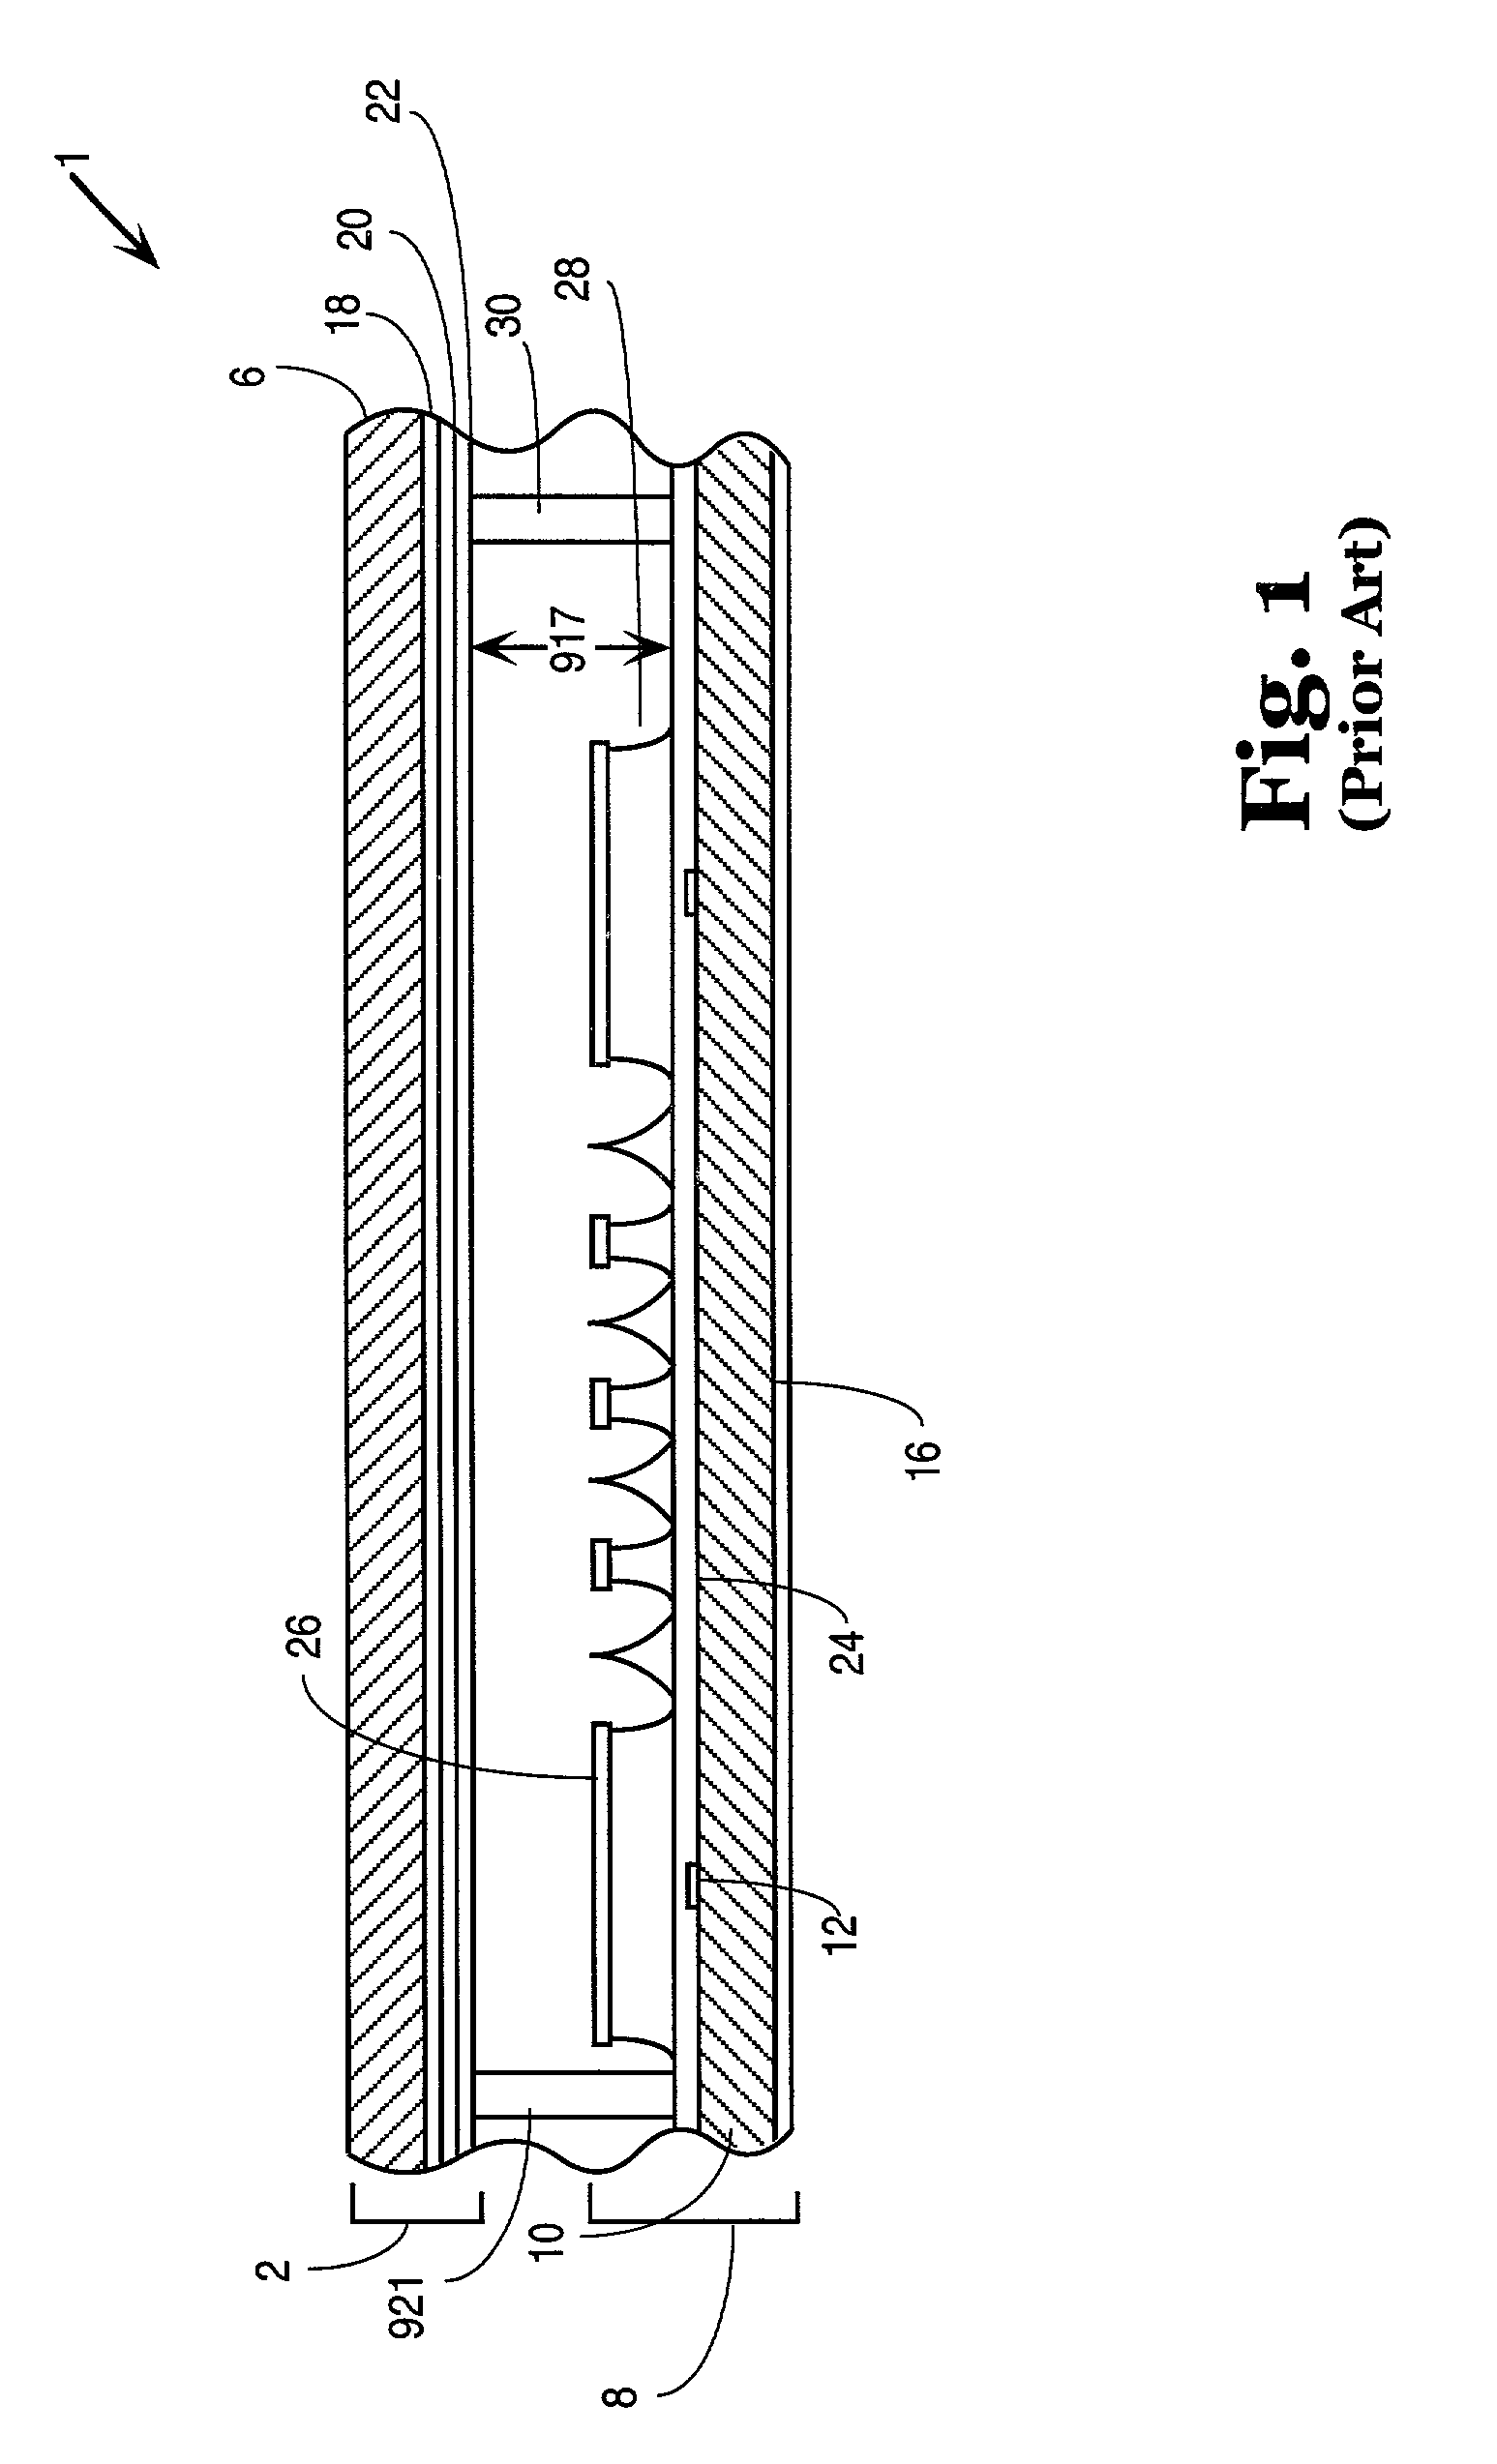 Display device with an array of display drivers recessed onto a substrate